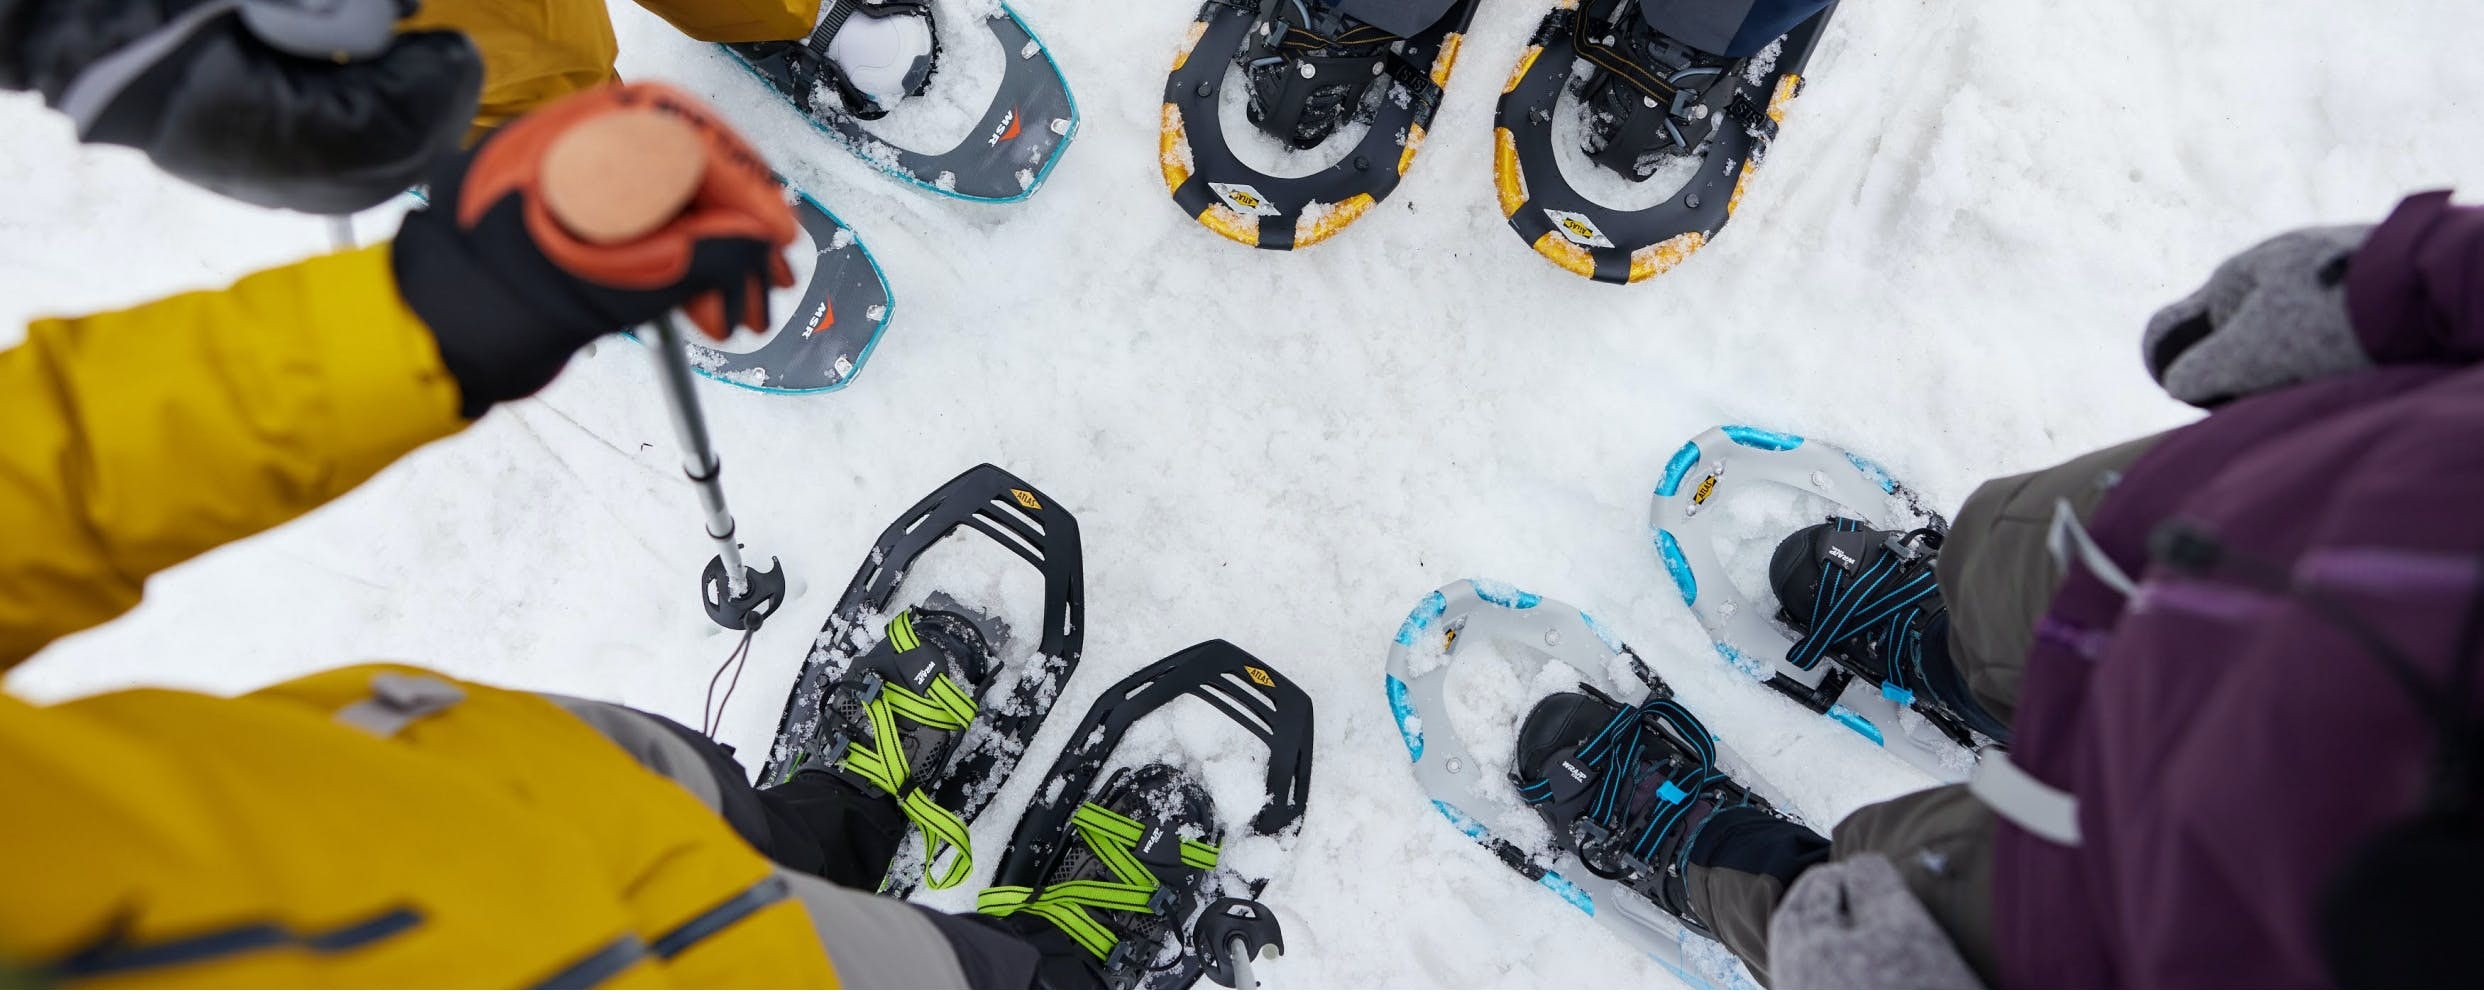 Find the right snowshoes for your treks on trails or powder-filled weekends.